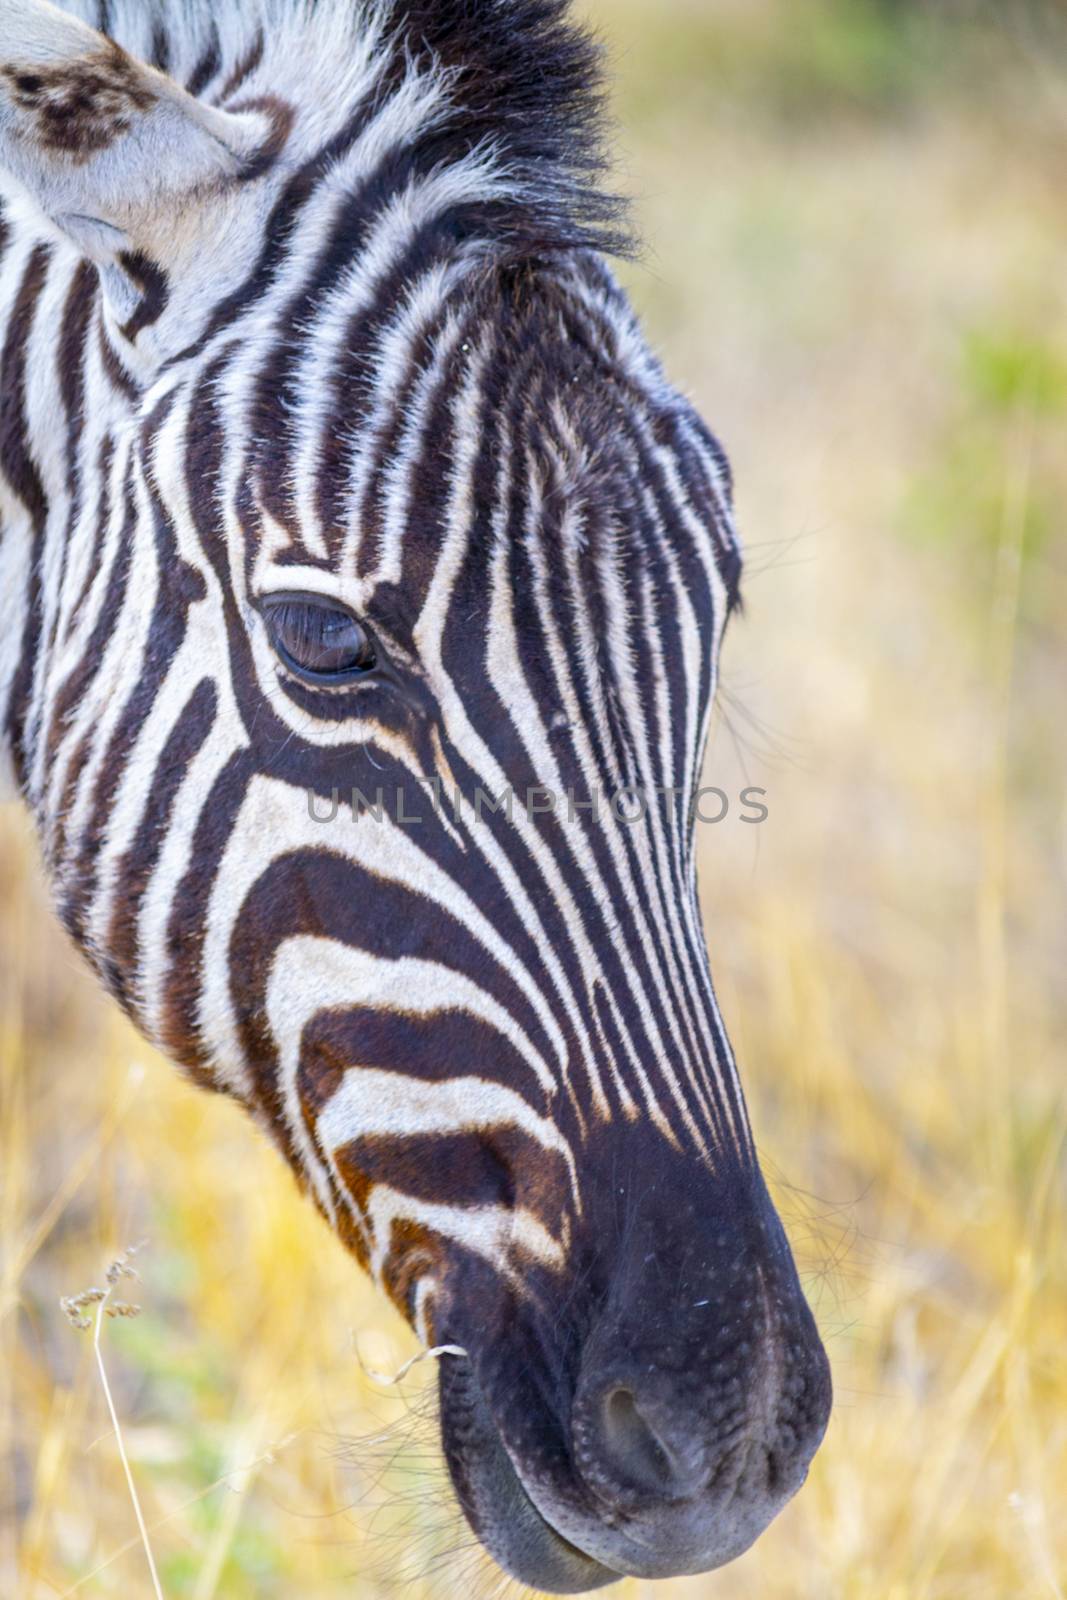 Close-up and portrait of a Zebra head by kb79